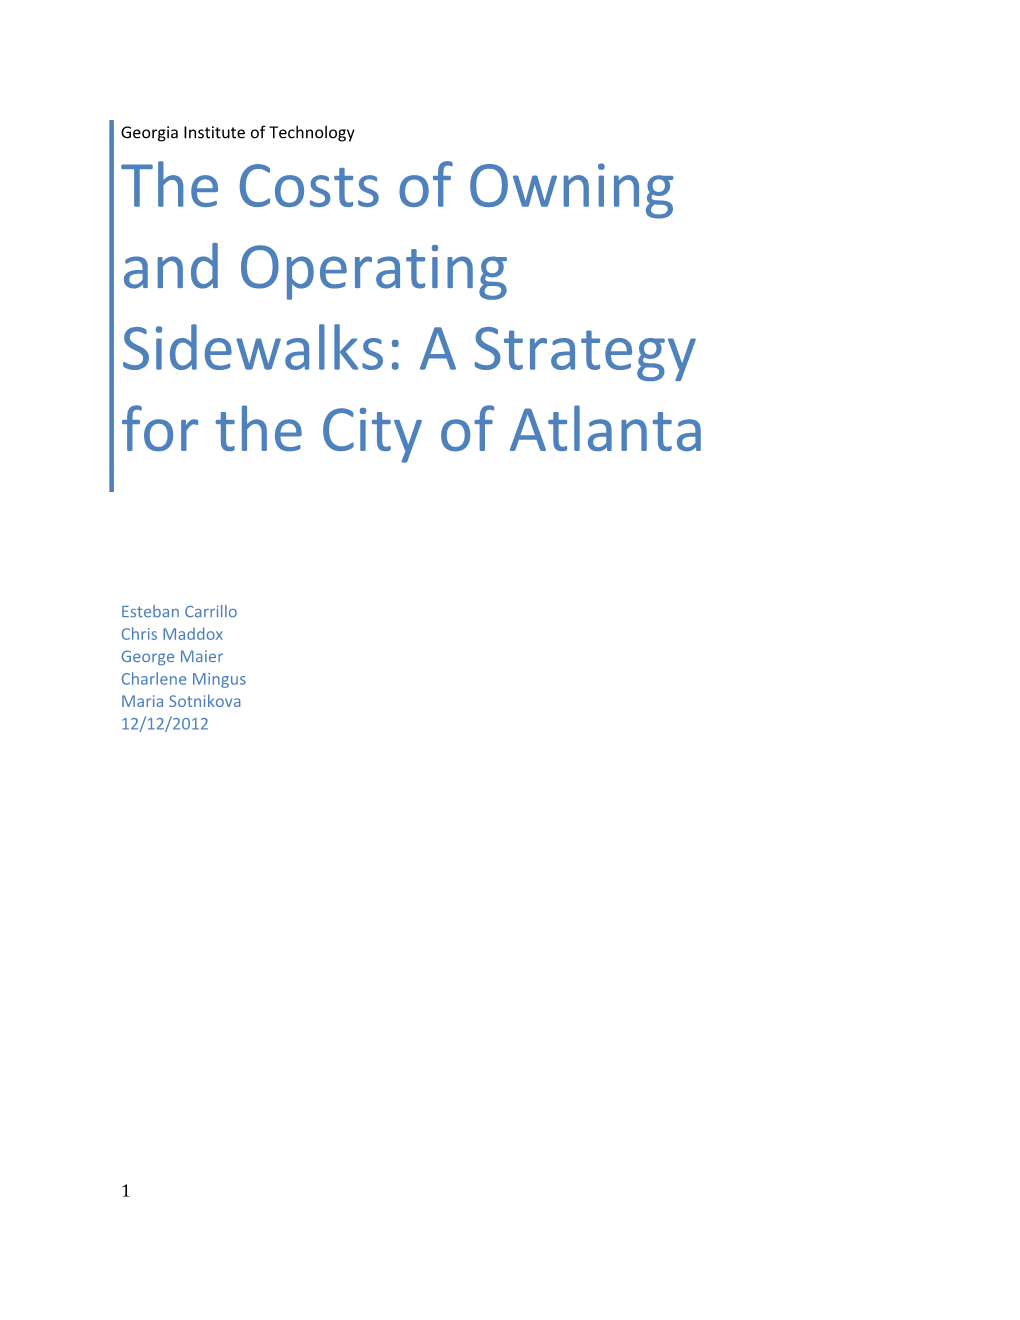 The Costs of Owning and Operating Sidewalks: a Strategy for the City of Atlanta